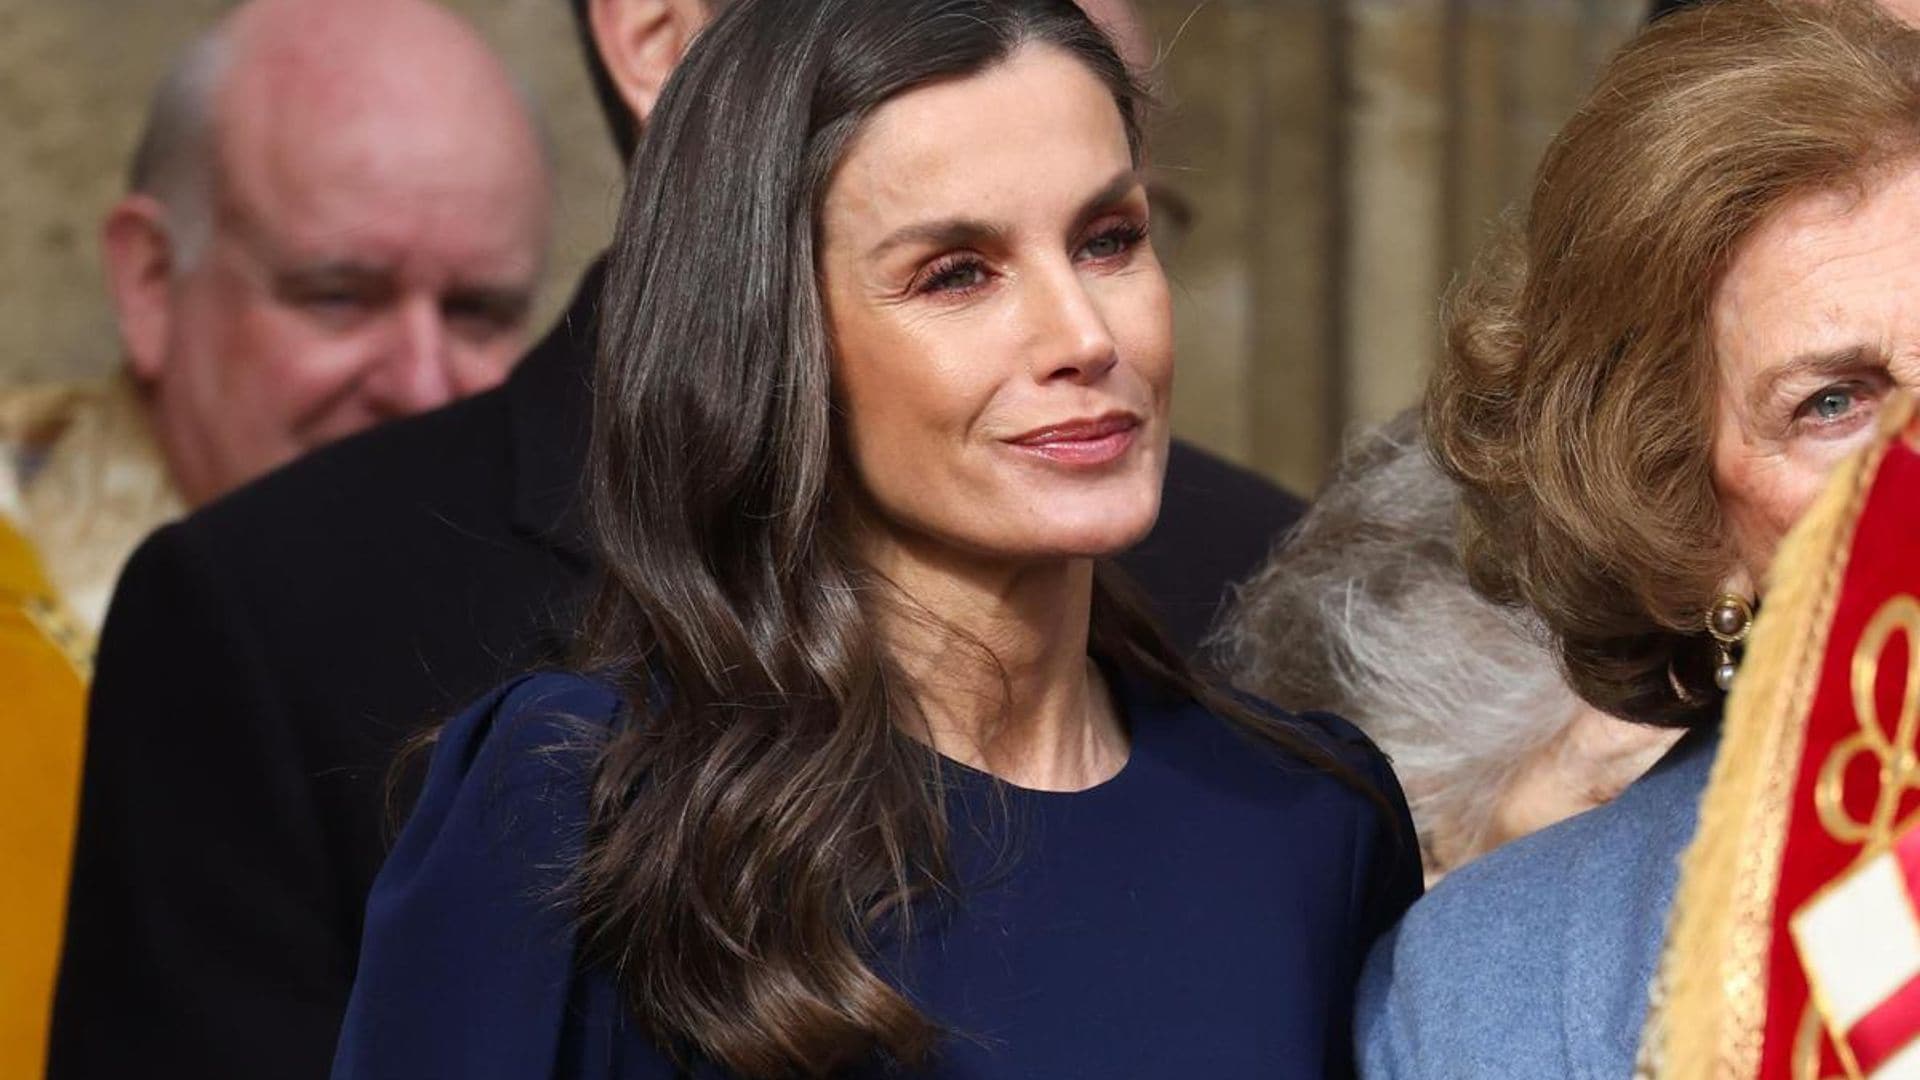 Queen Letizia changes up her look with short new haircut